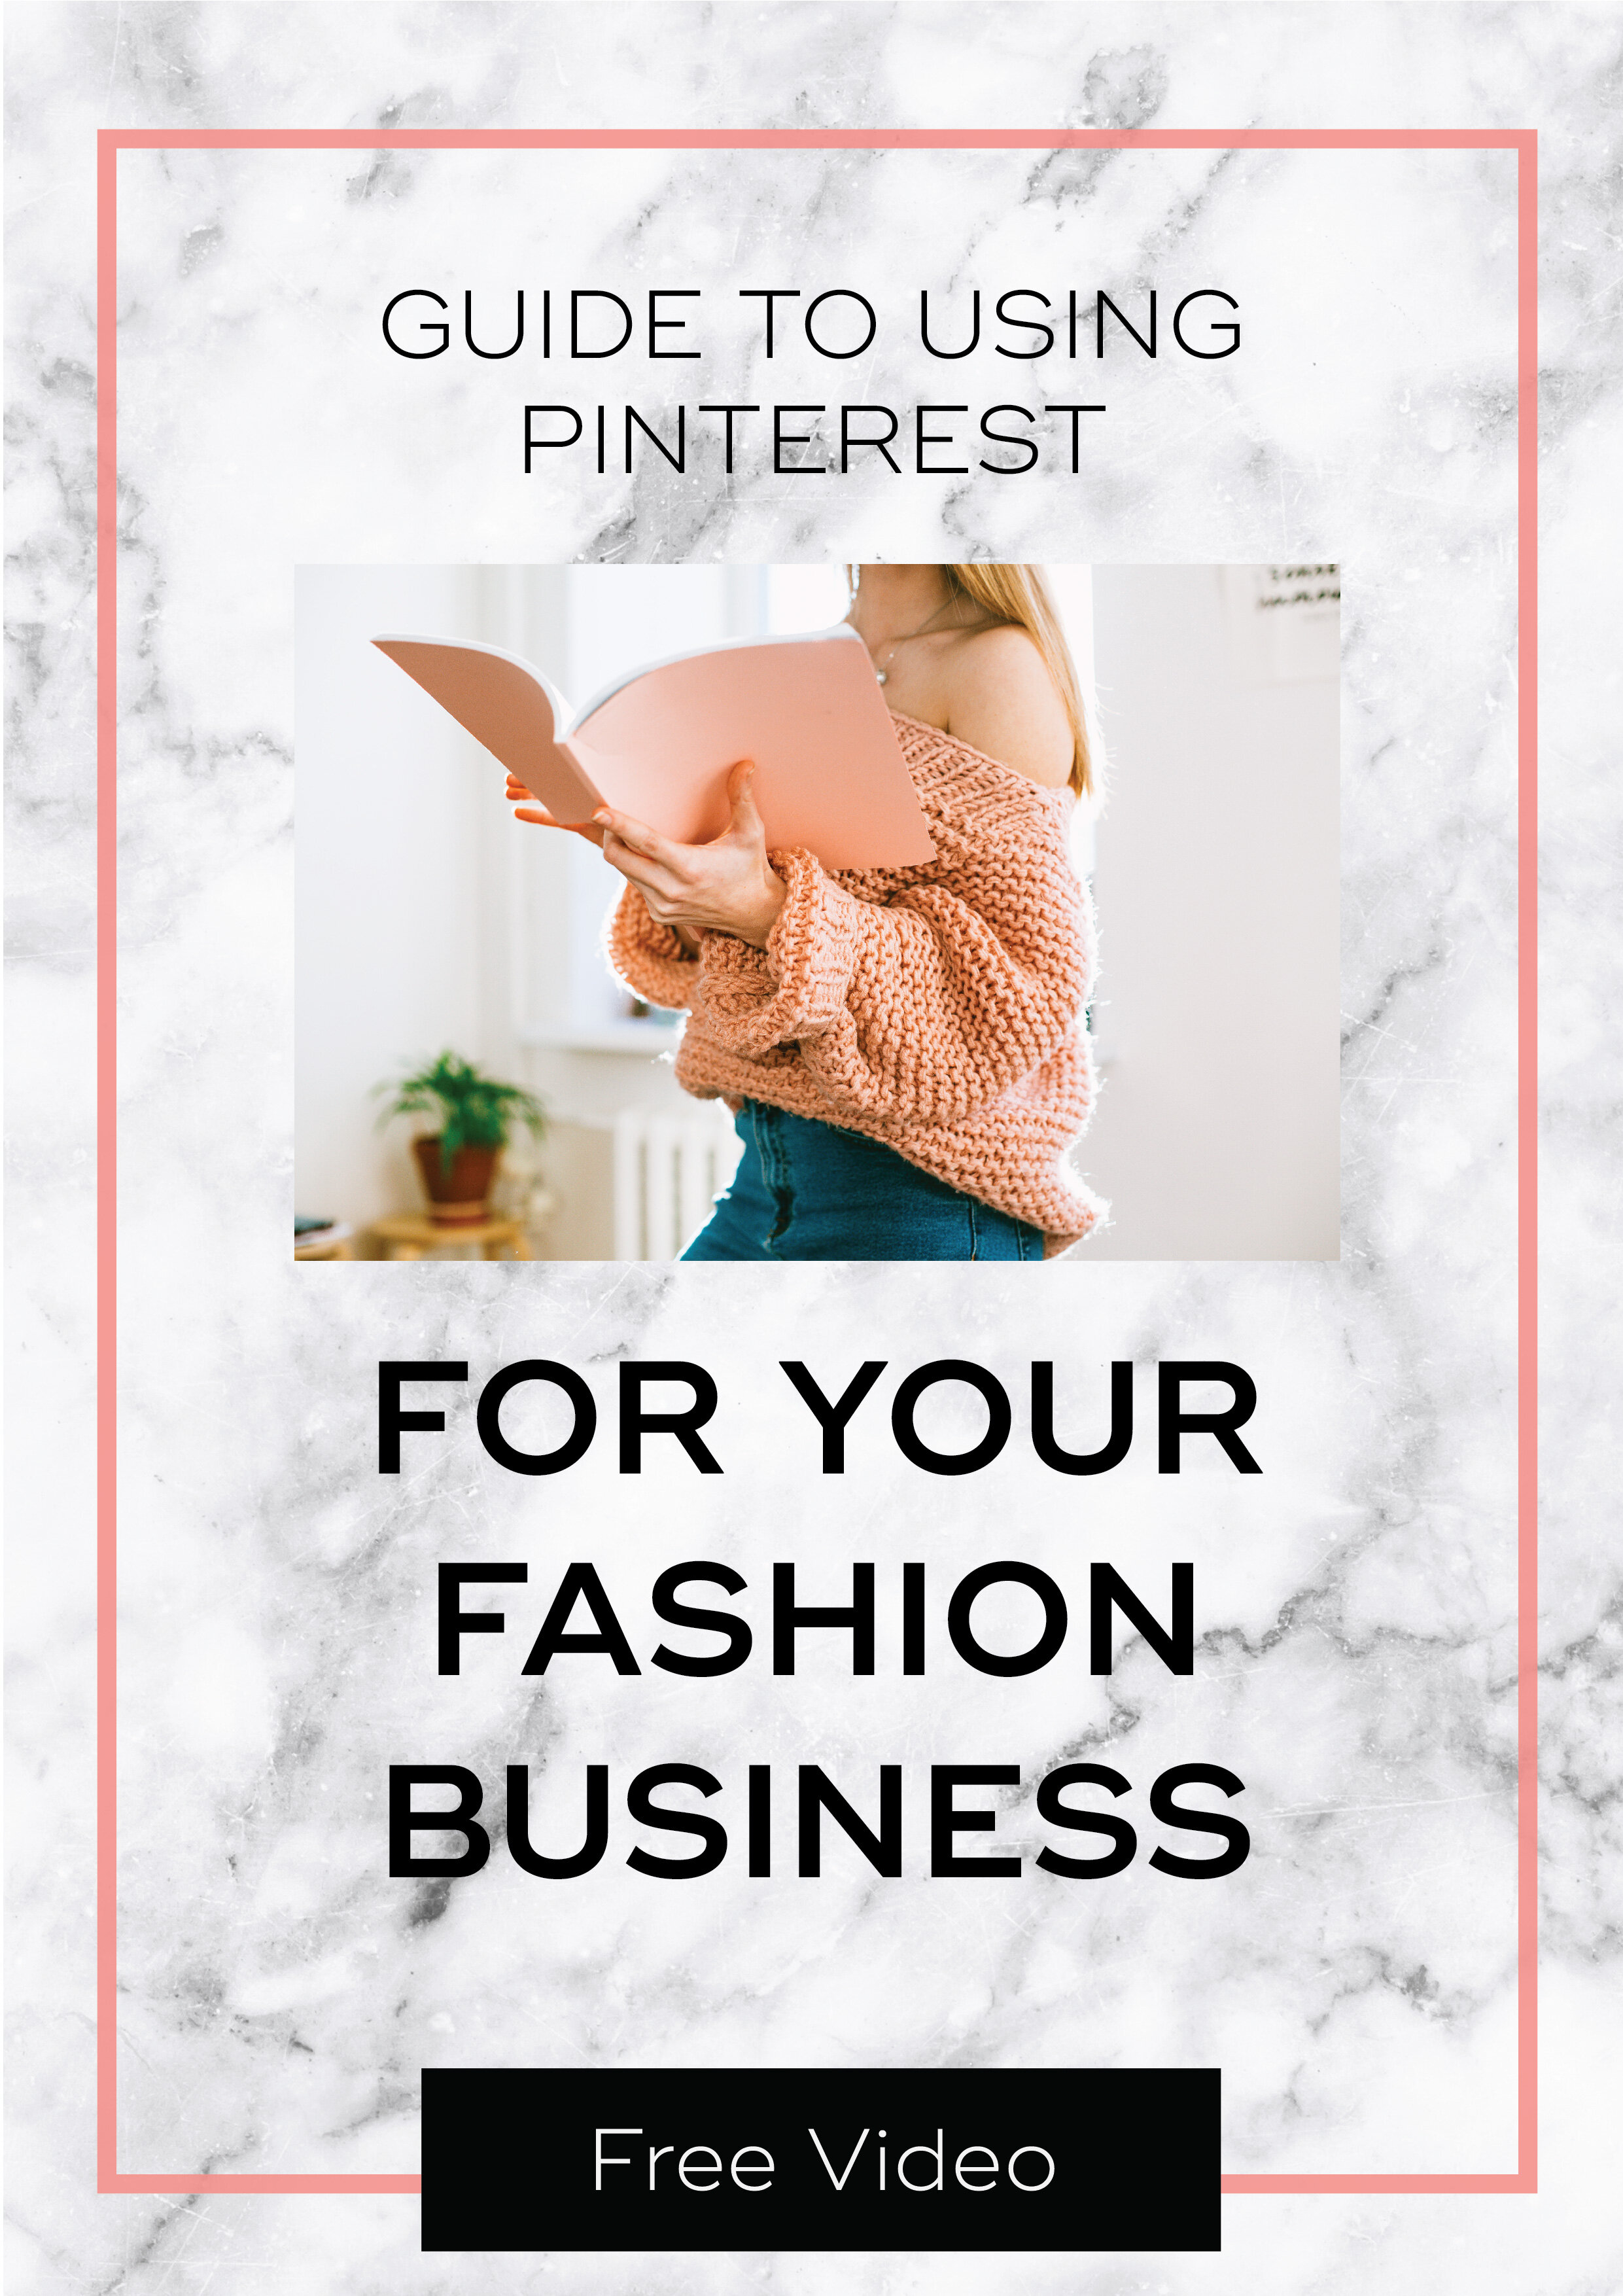 Guide to Using Pinterest for your Fashion Business1.jpg